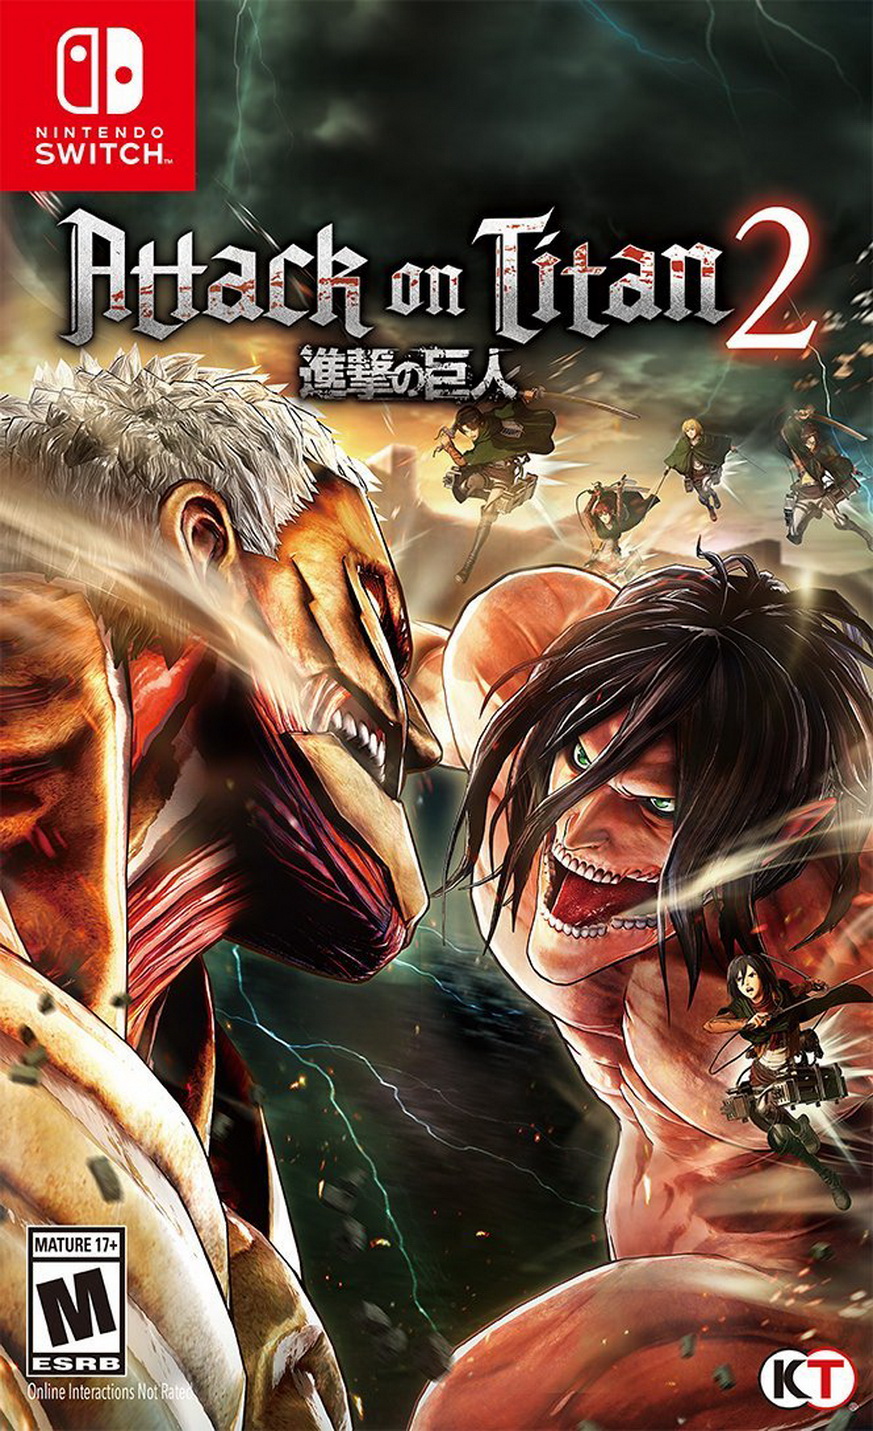 Attack on Titan Japan PlayStation Game Adds 4-Player Co-Op Content! -  Japan Code Supply